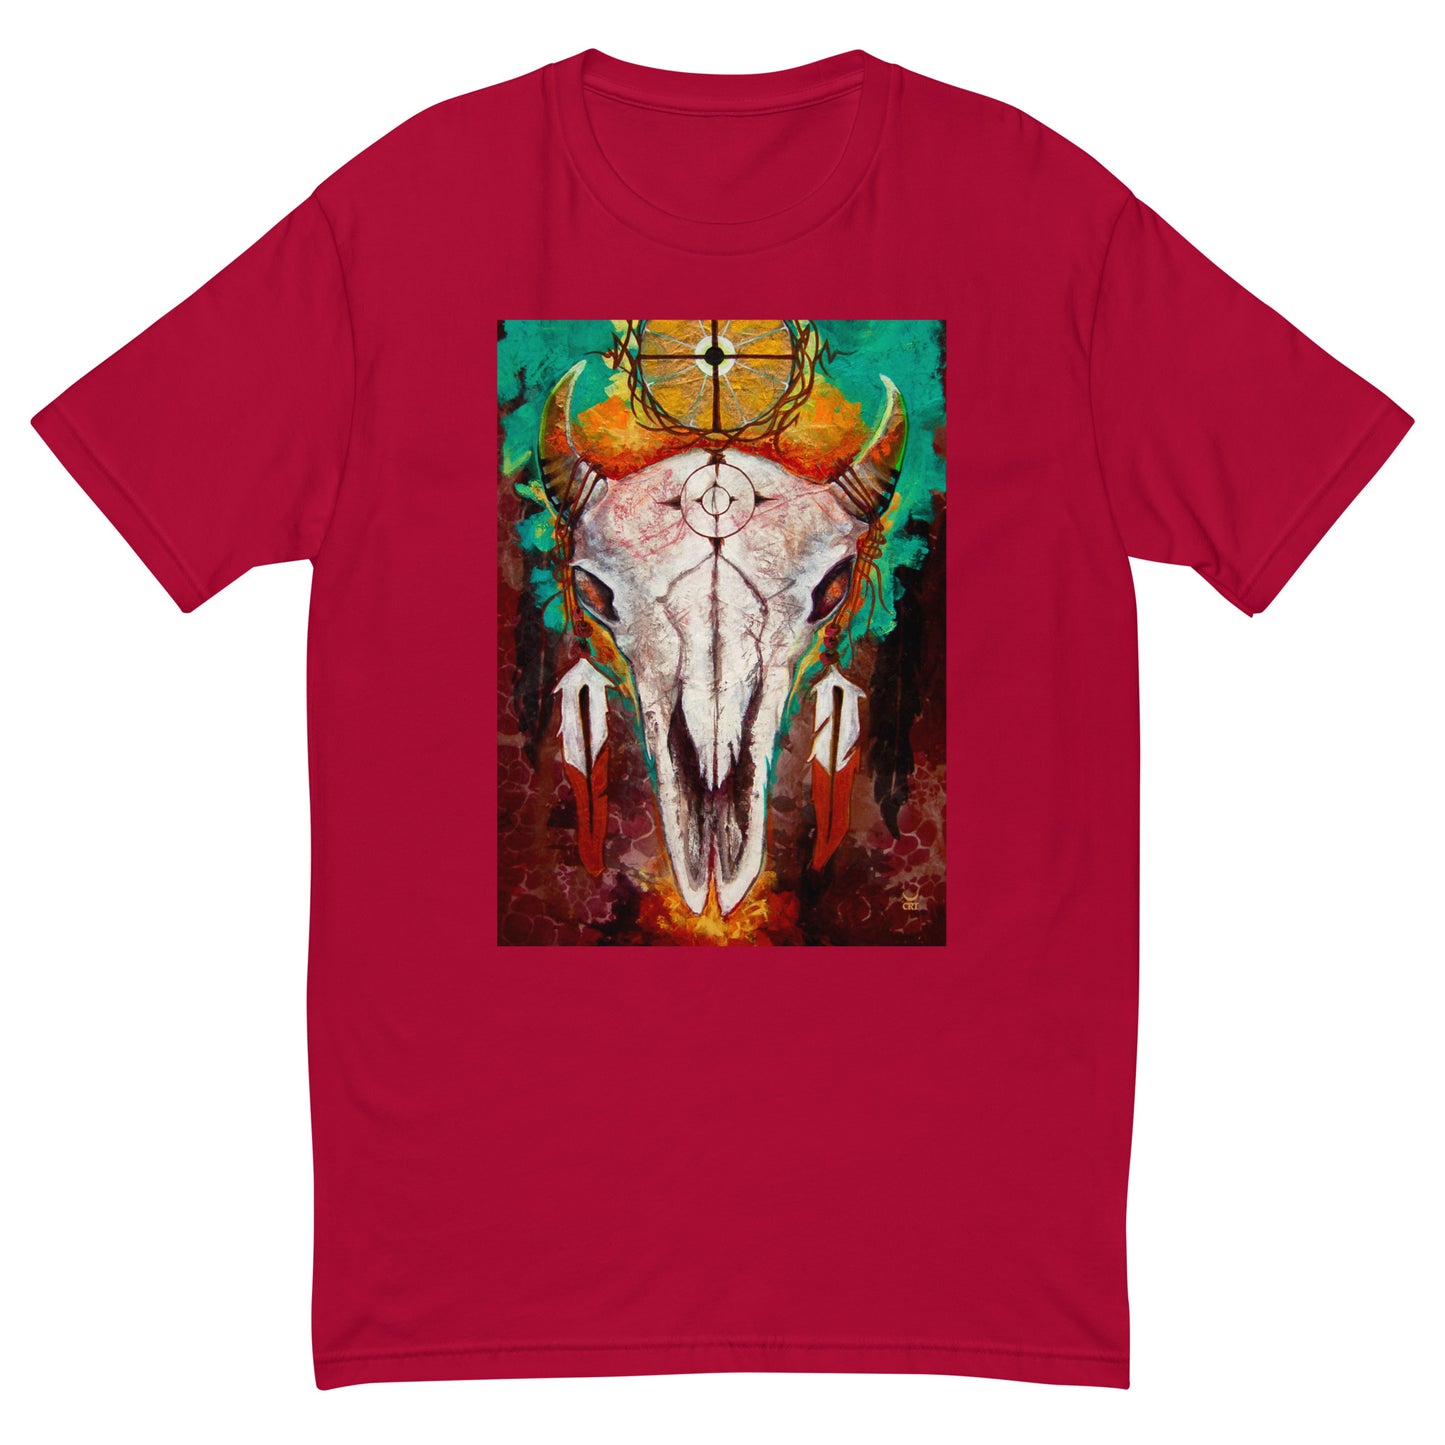 Large Skull - Men's Fitted Tee